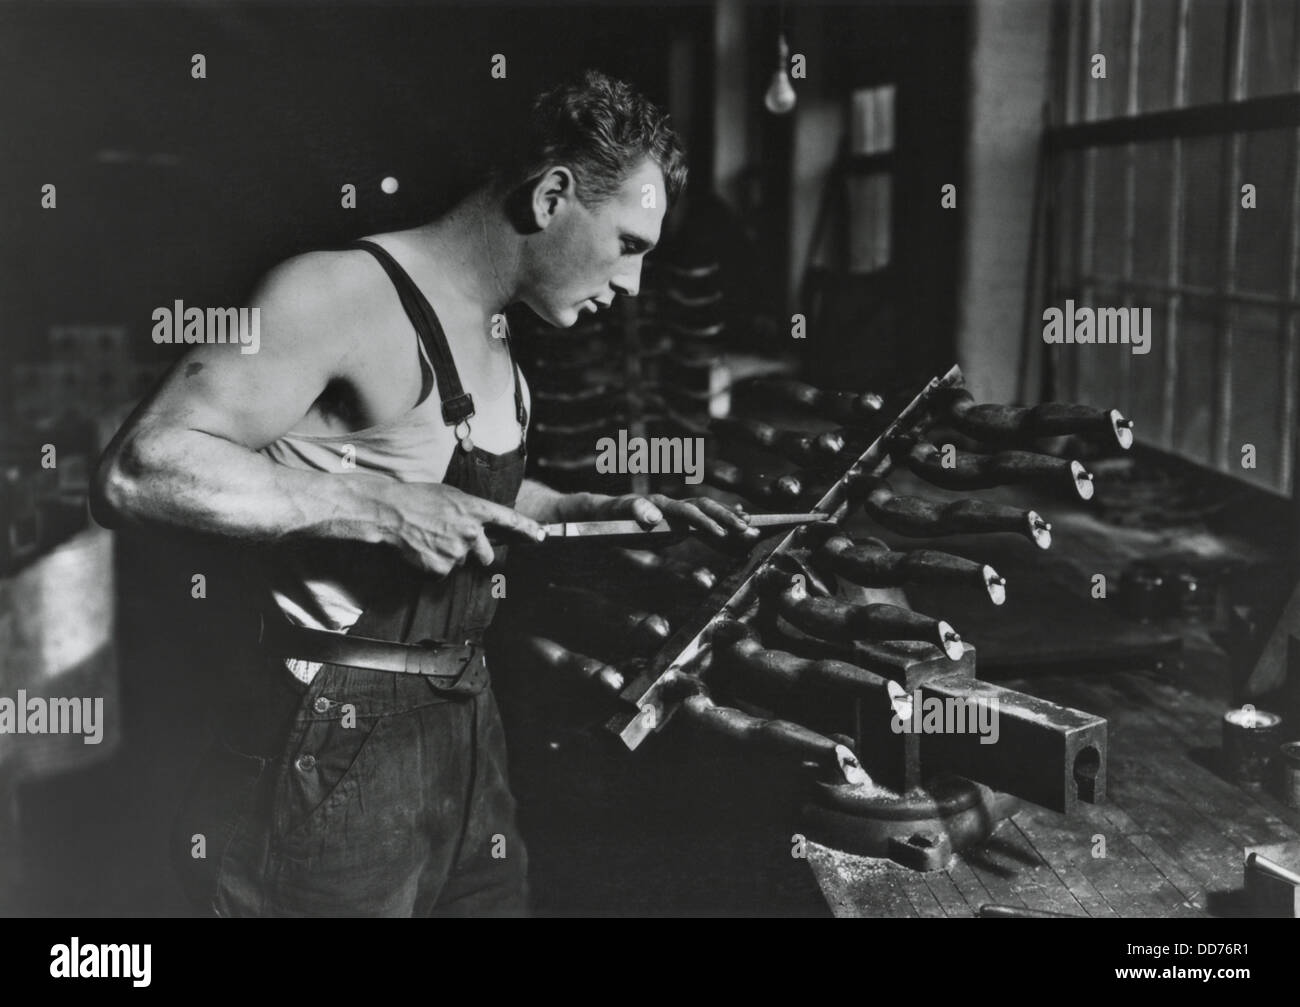 Worker building rubber dolls molds in Work Projects Administration (WPA) funded employment, Dec. 1936-July 1937. Photo by Lewis Stock Photo